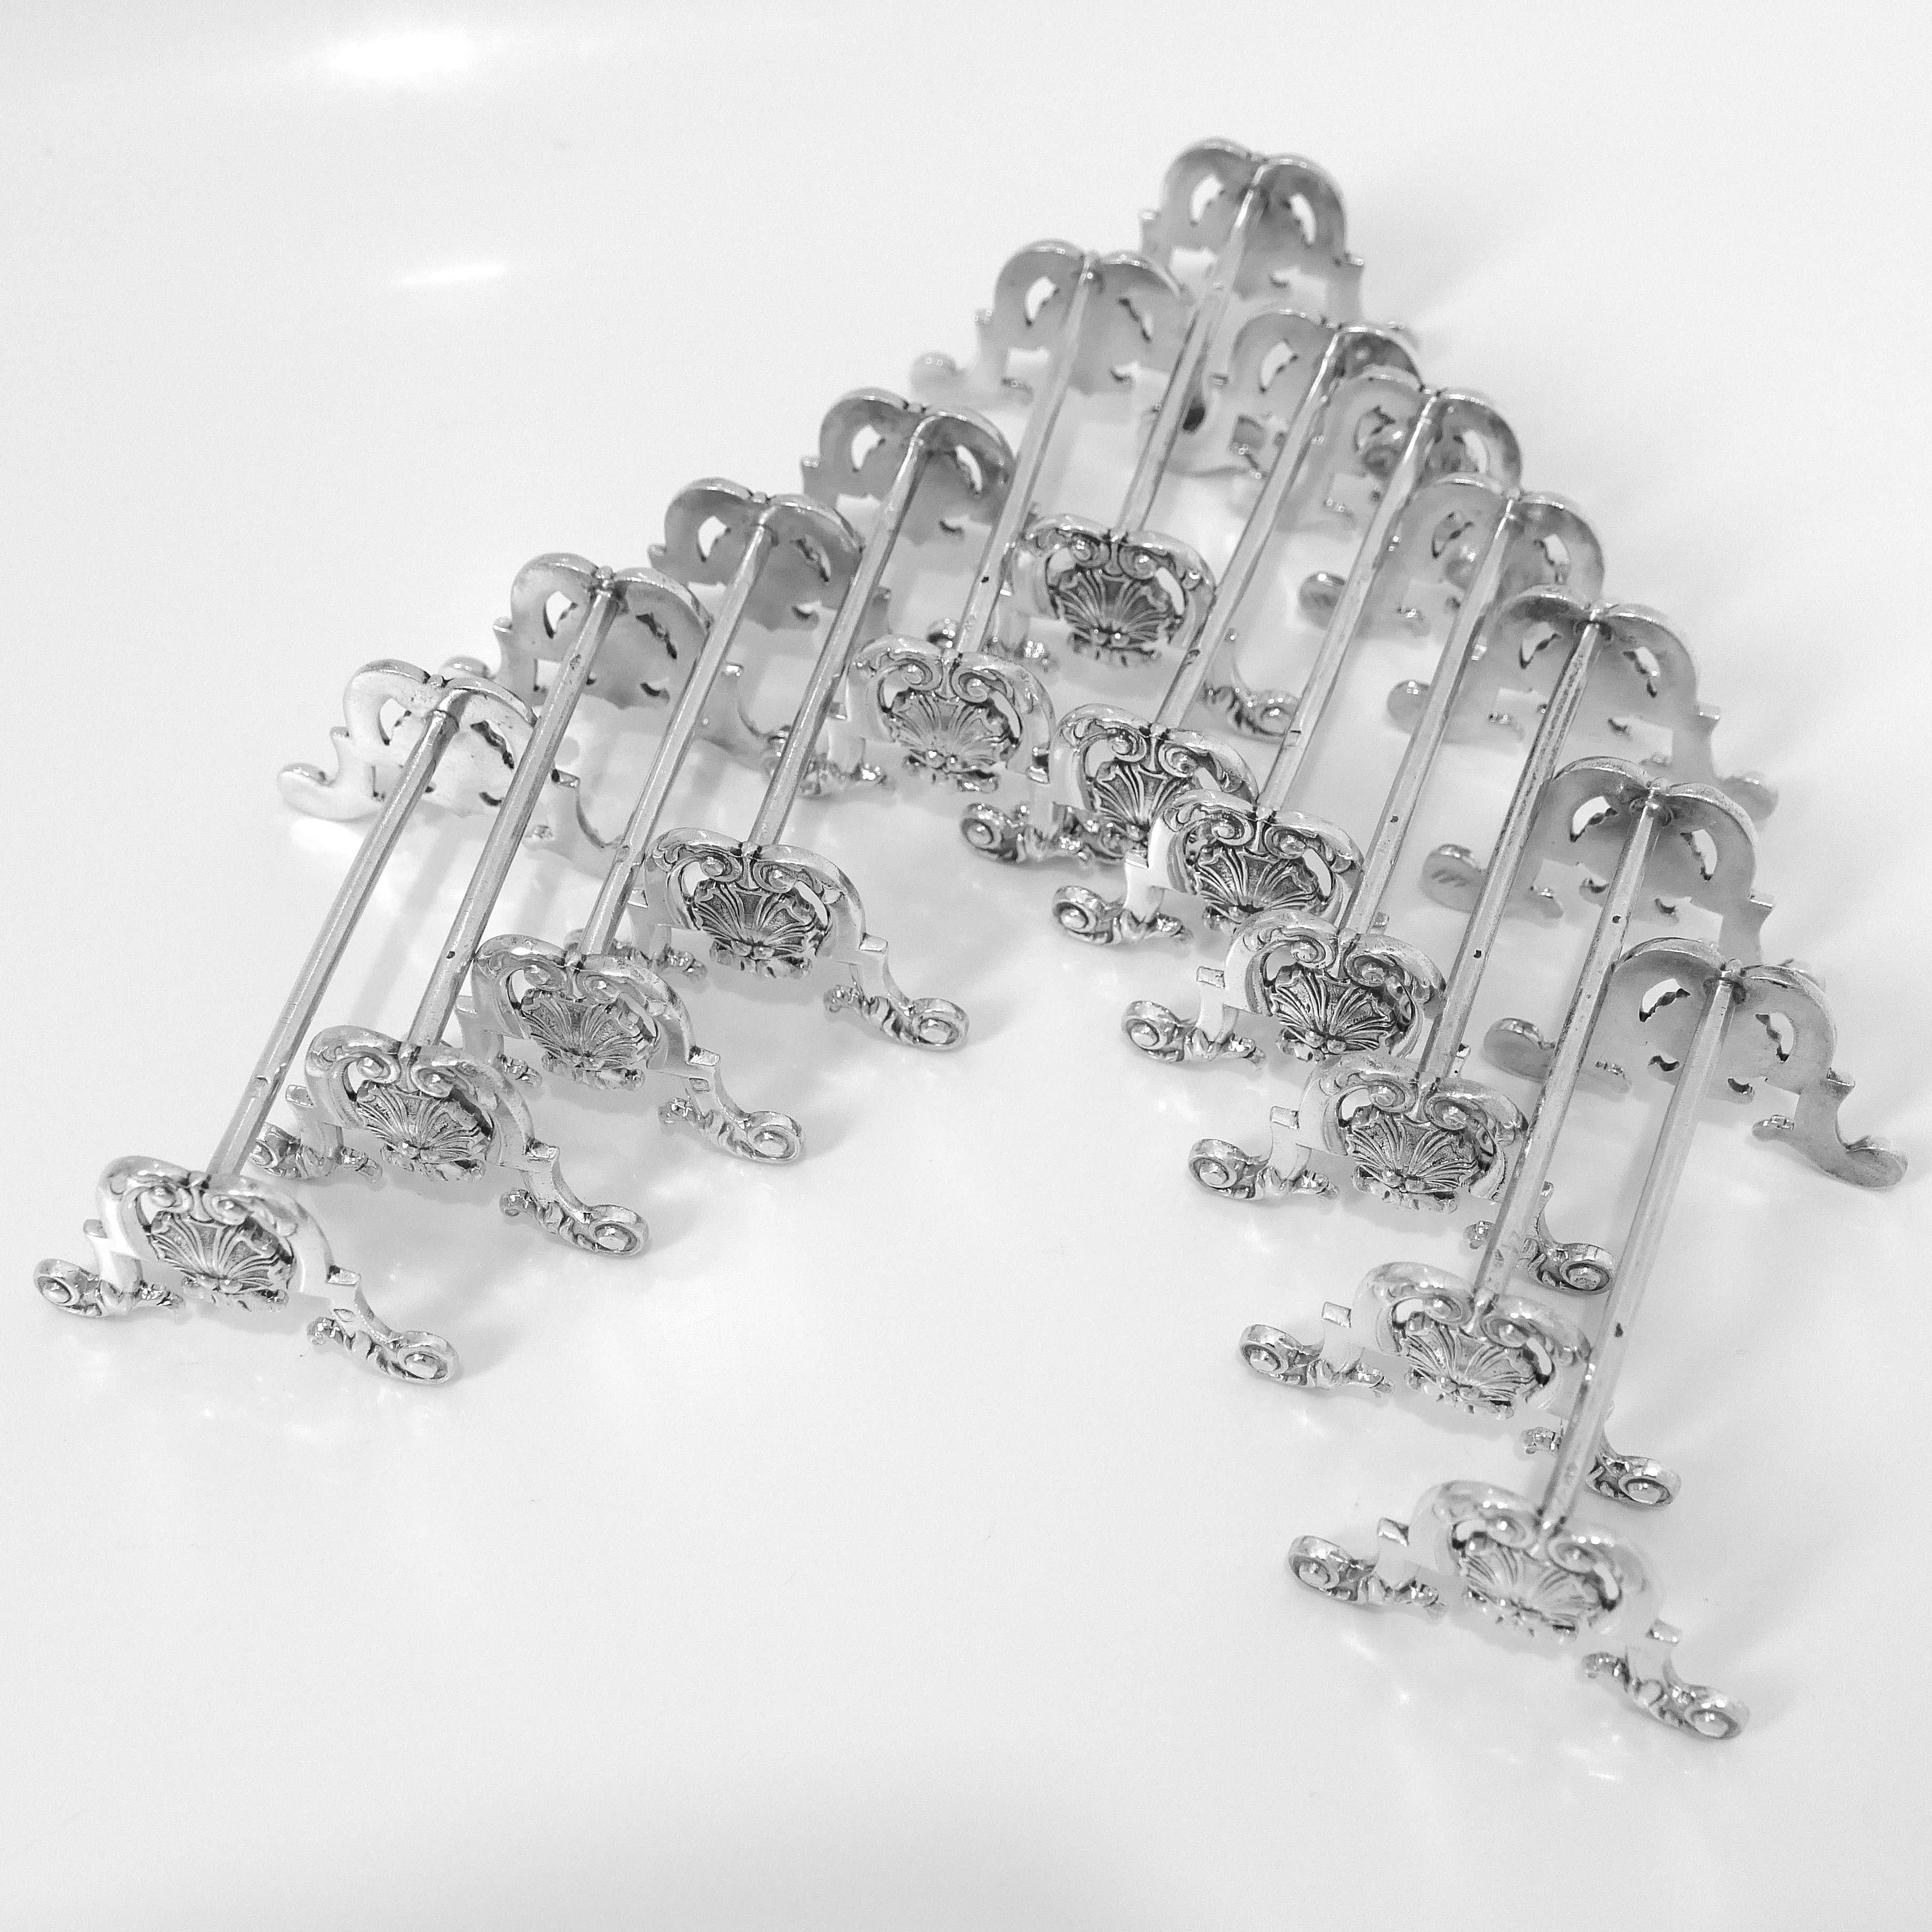 Late 19th Century Puiforcat Rare French All Sterling Silver Knife Rests Set of 12 Pieces For Sale